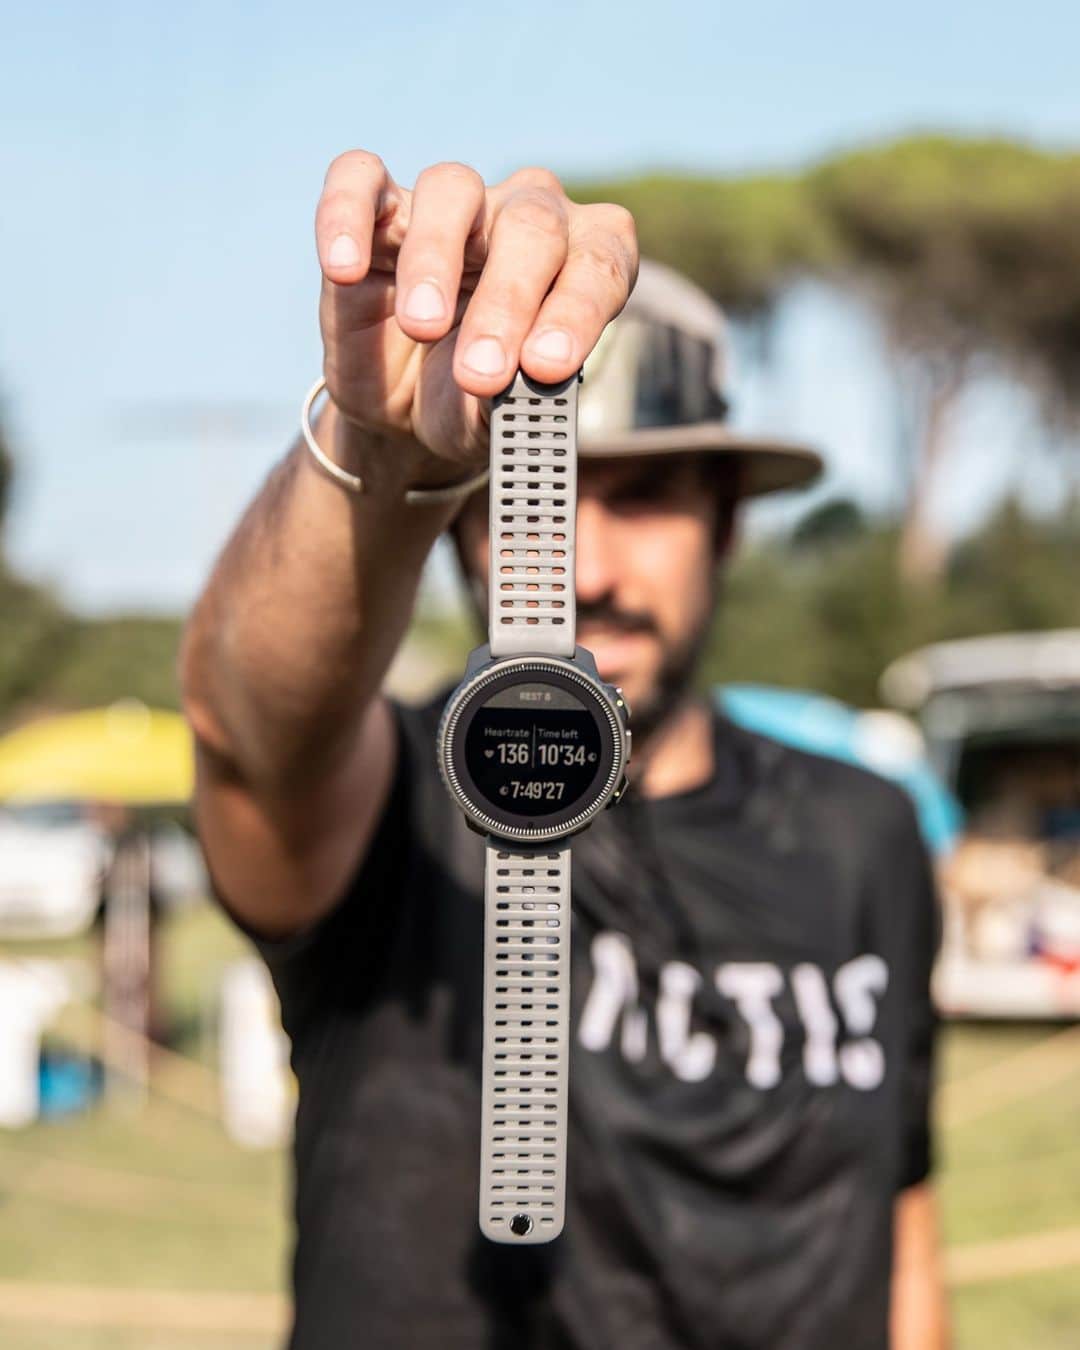 Suuntoのインスタグラム：「There’s no finish line in sight in a Backyard Ultra – and exactly that is the beauty of the event!⁣ ⁣ The Backyard Ultra concept was started in 2011 and has since spread all around the world. The idea is simple: run a 6,7 km lap every hour until there is only one participant left. (That 6,7 km/h pace is the pace needed to cover 100 miles in 24 hours.)⁣ ⁣ If you are up for a Backyard Ultra yourself, make sure to use SuuntoPlus Backyard Ultra sport app on your Suunto. It will give you key info, like the lap distance and remaining time until the start of the next lap.⁣  Our friends in Girona got together for Gina Backyard Ultra last weekend for some impressive runs and overall good times!⁣ ⁣ 📷 @rsalanova⁣ ⁣ #GinaBackyard @klassmark⁣ #BackyardUltra #Ultrarunning⁣ #SuuntoRace #SuuntoVertical⁣ #AdventureStartsHere」